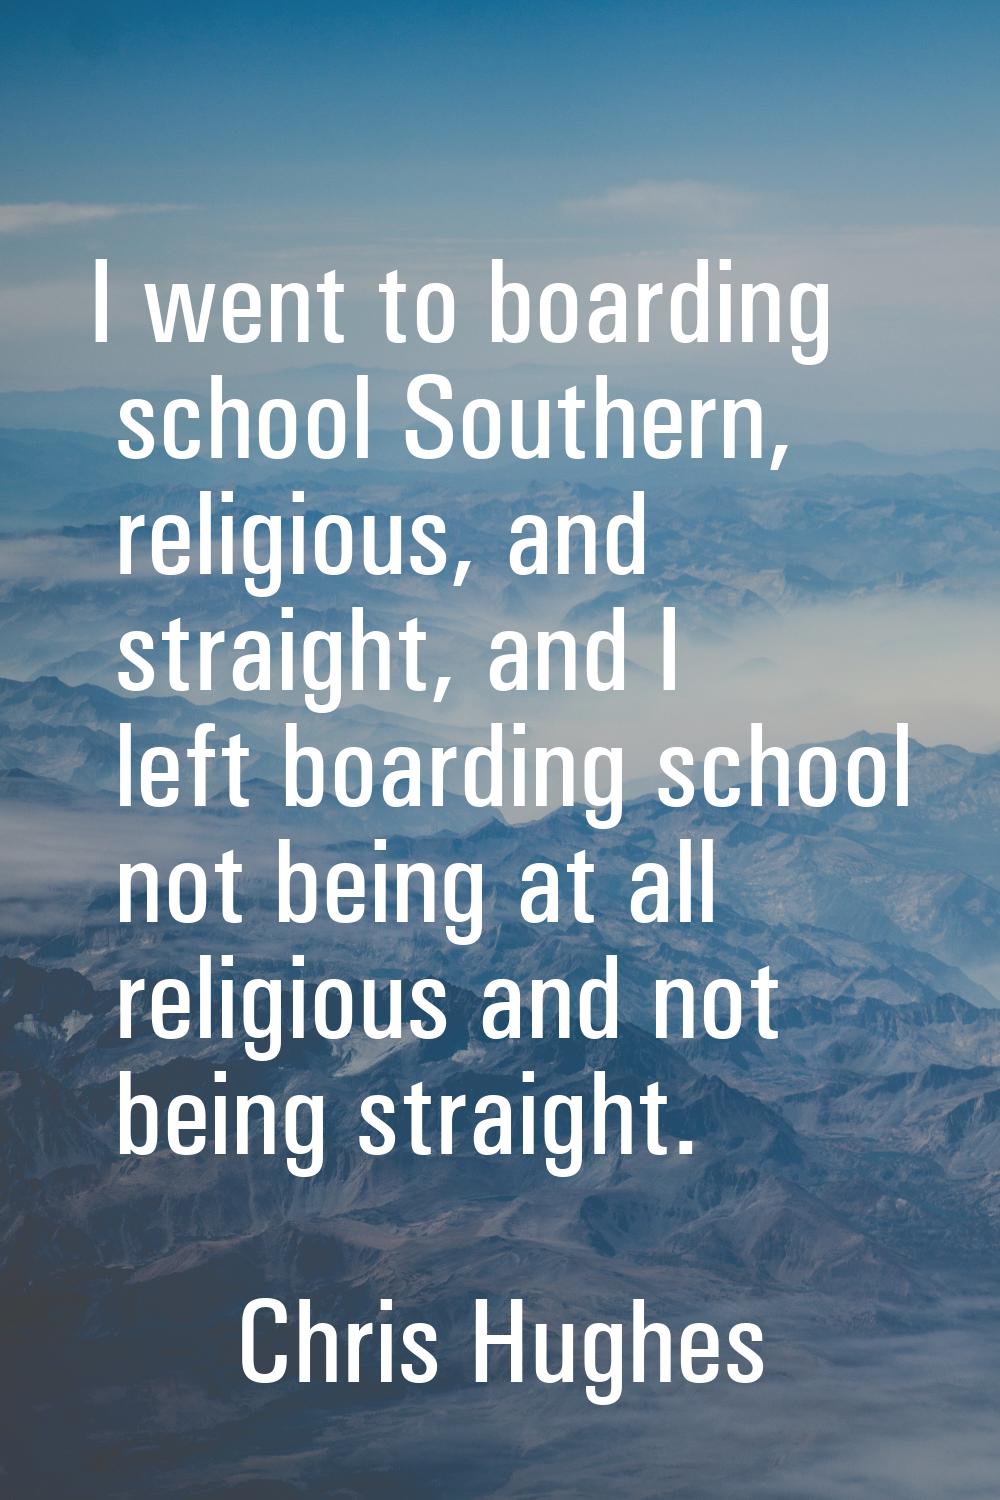 I went to boarding school Southern, religious, and straight, and I left boarding school not being a